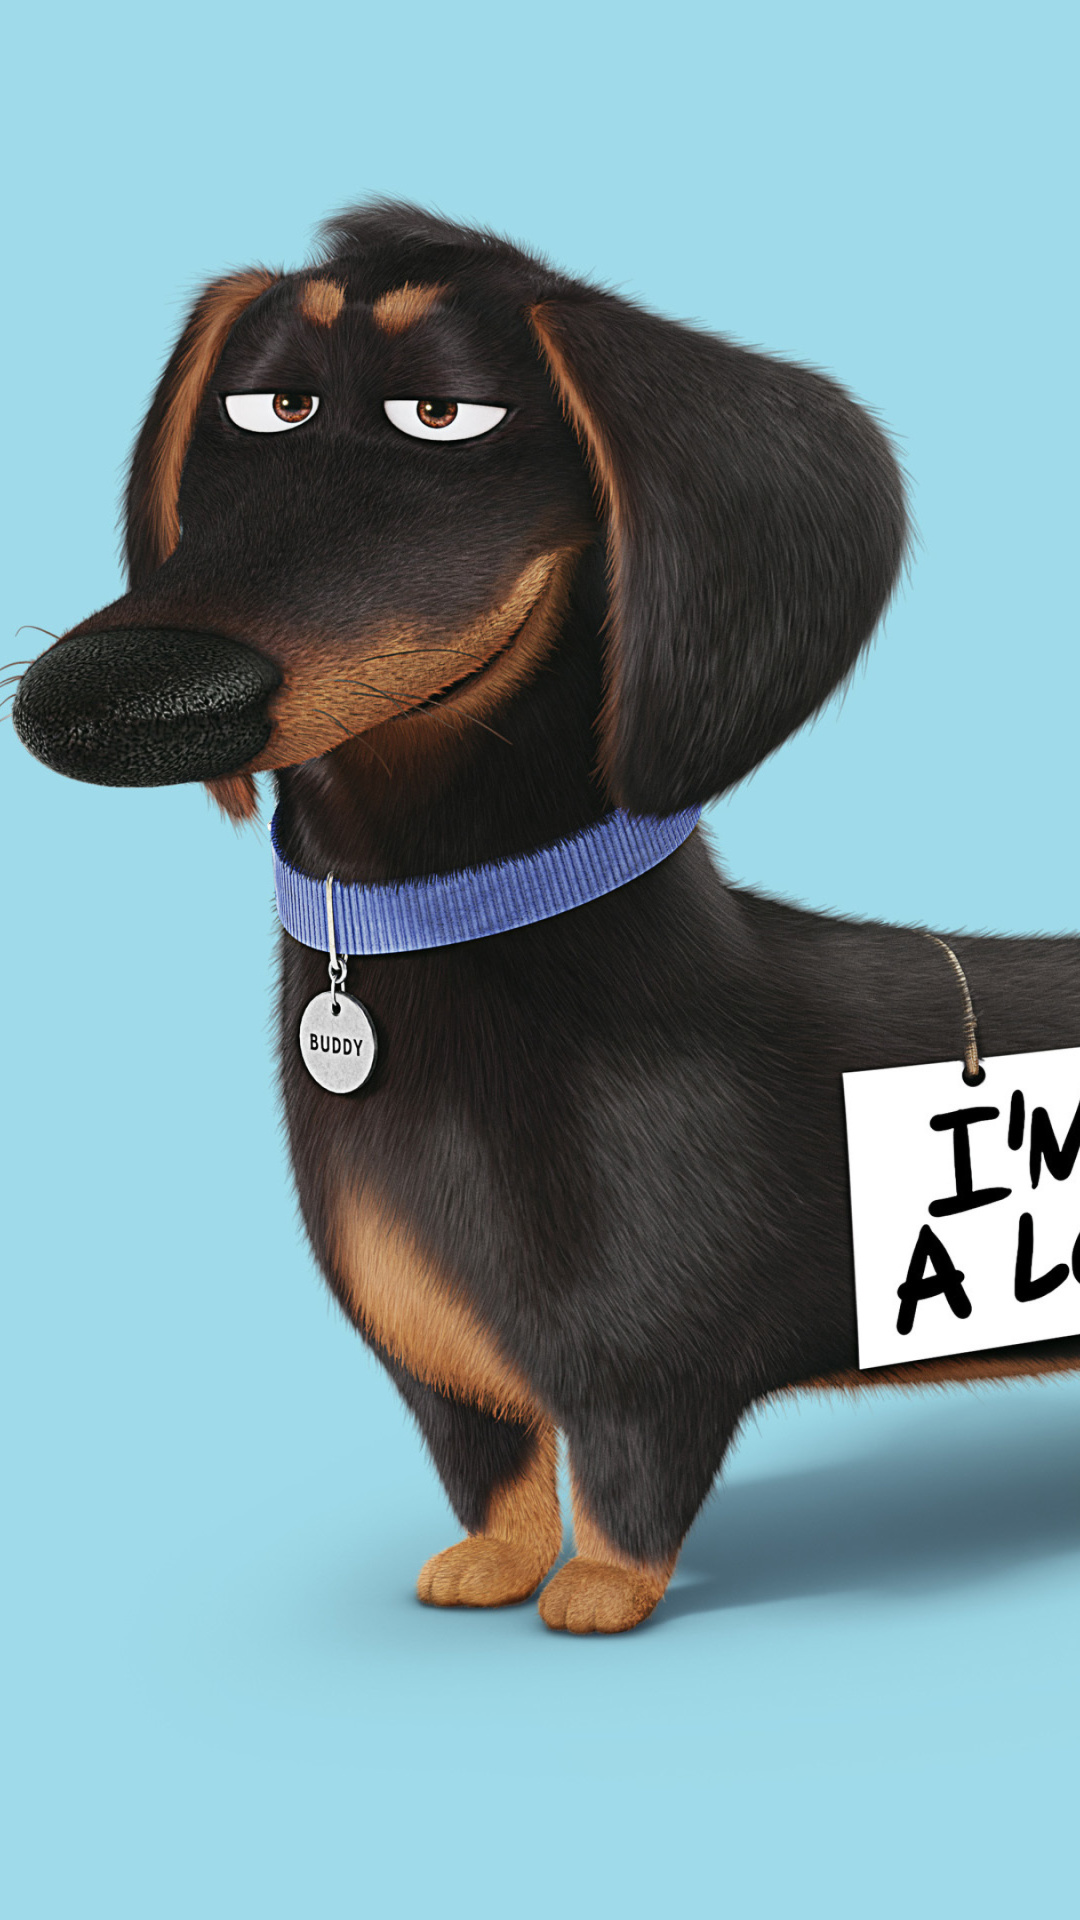 Das Buddy from The Secret Life of Pets Wallpaper 1080x1920